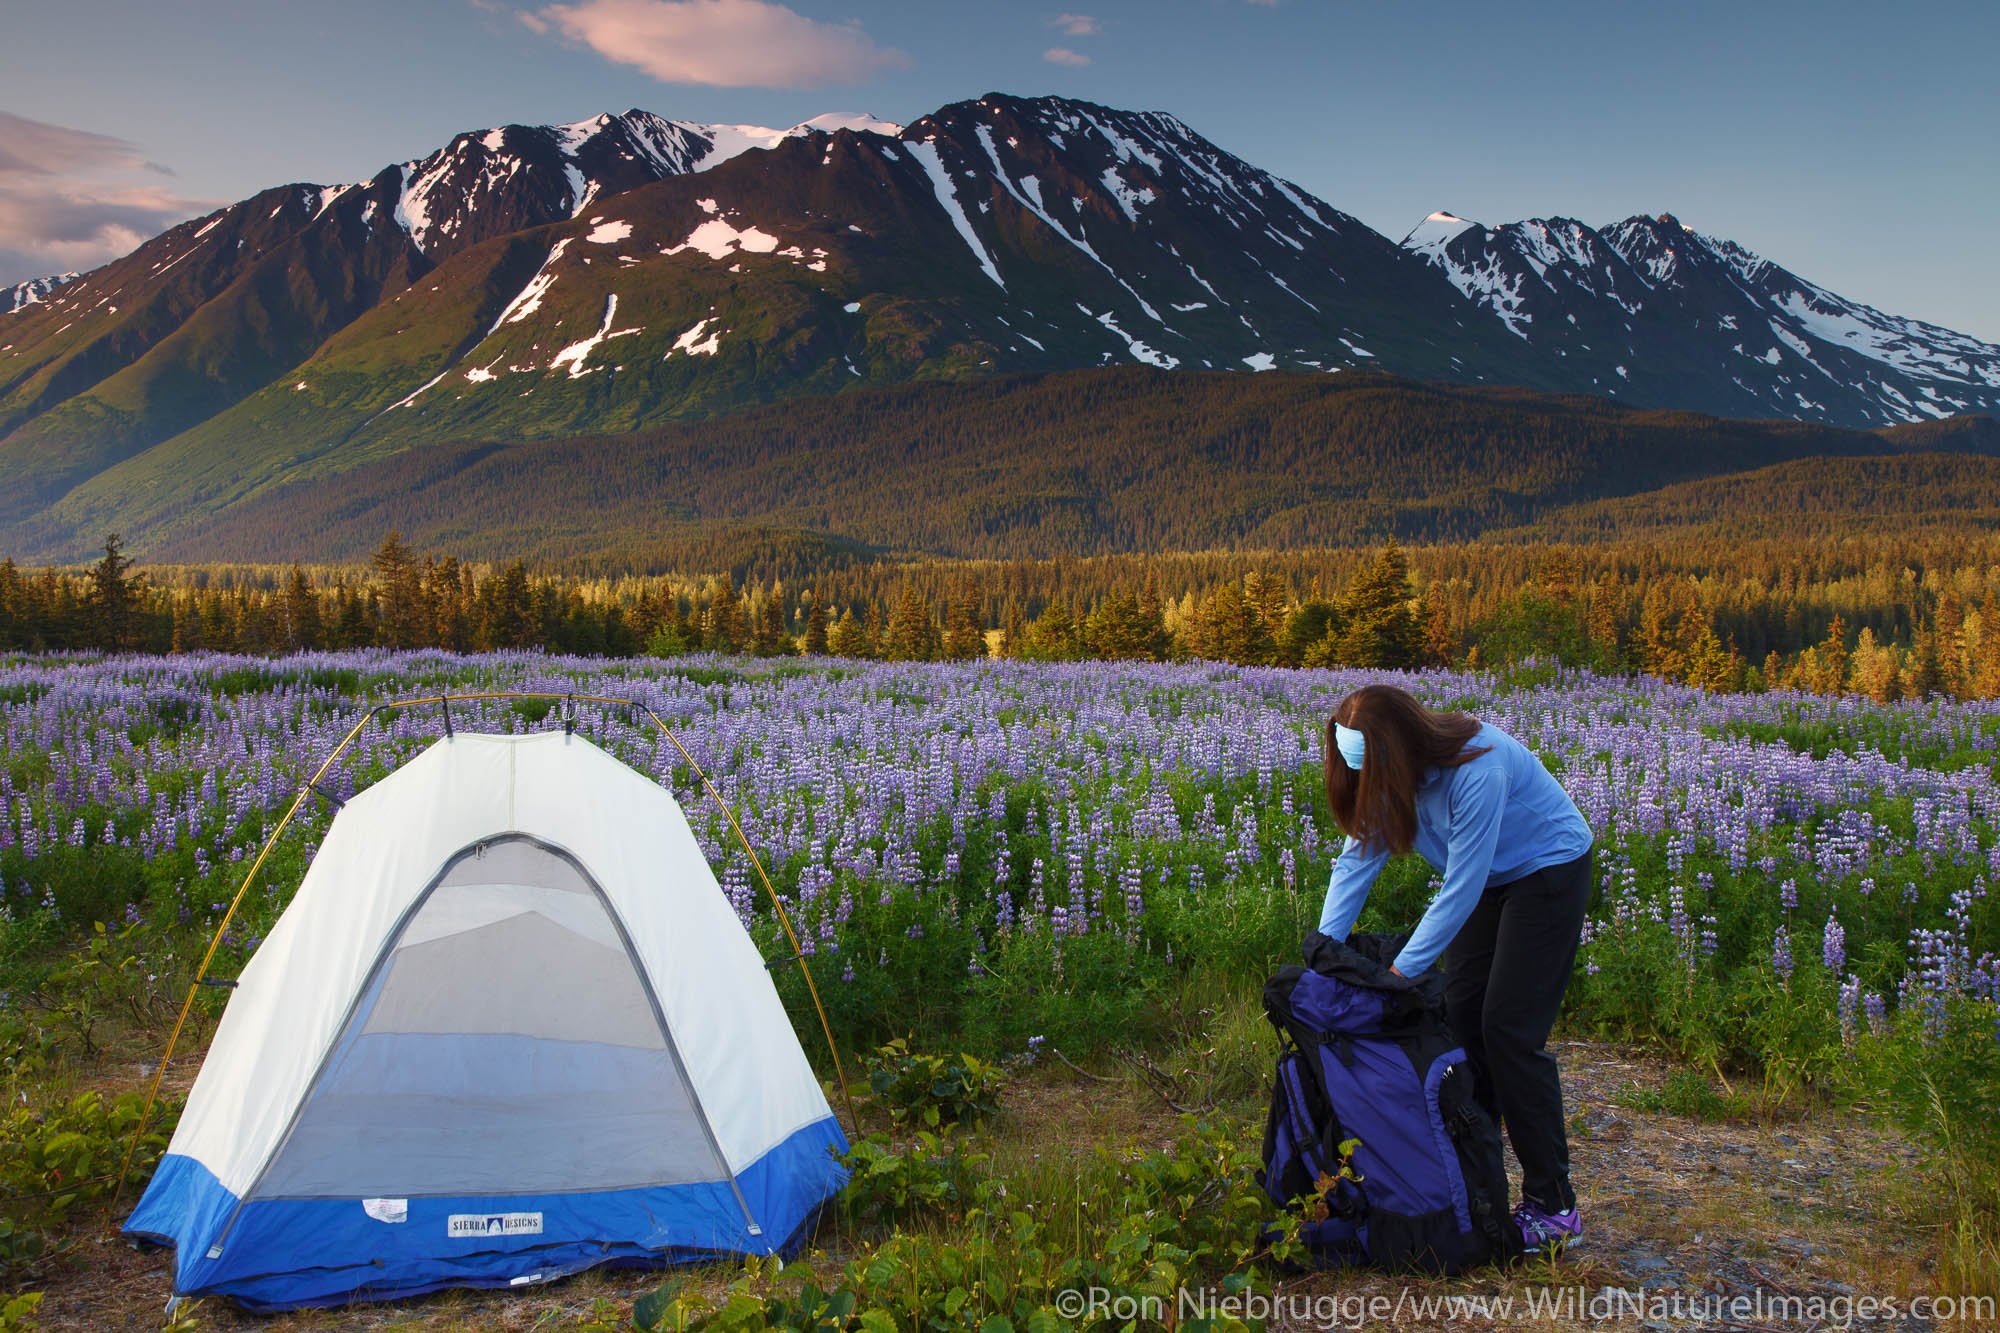 Camping in the Chugach National Forest, Alaska.  (model released)